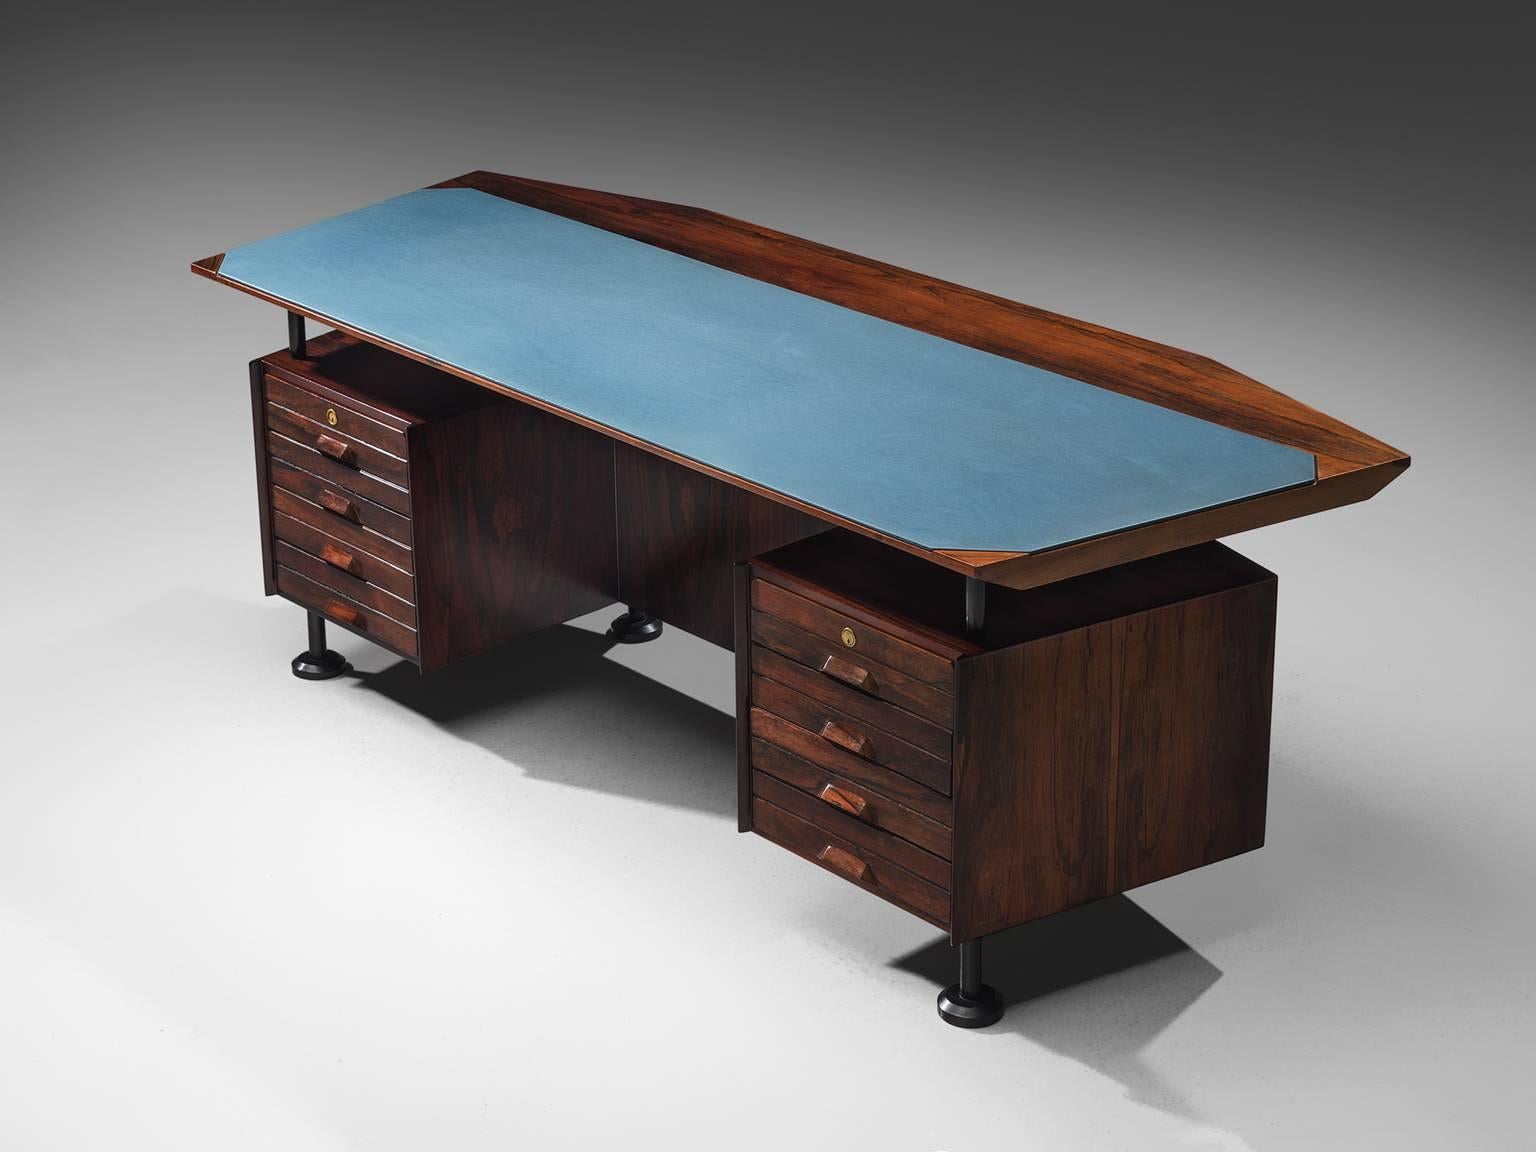 Desk with blue top in rosewood, brass, Italy, circa 1950s.

This table is both refined and distinguished as it's appearance is stately and strong. This sculptural Italian table or writing desk is truly monumental with its dark wood that contrasts